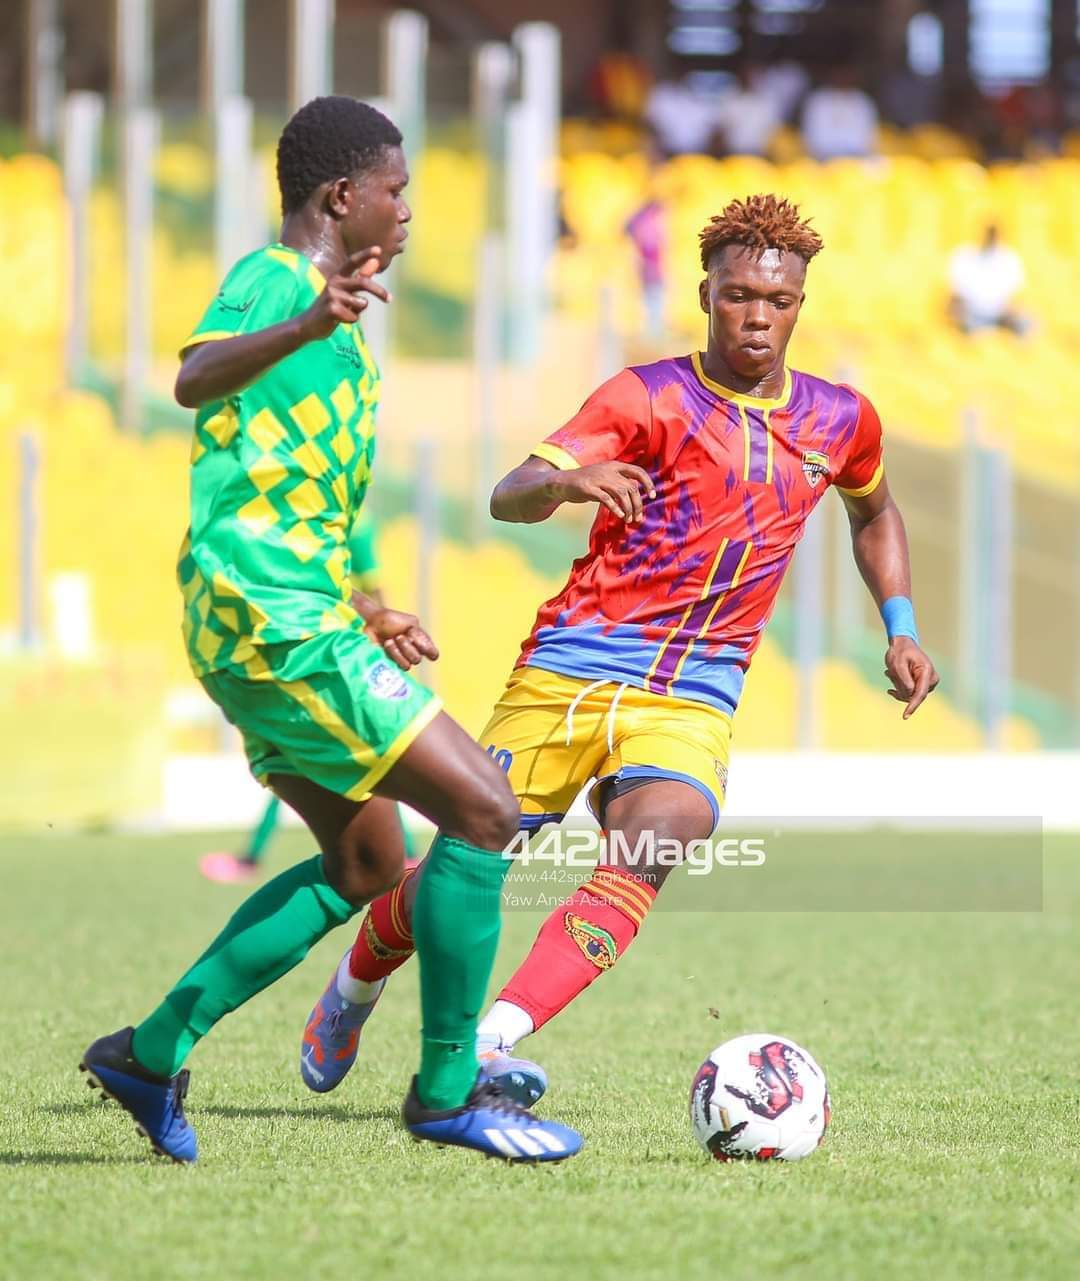 Hearts of Oak down Nsoatreman FC, Accra Lions hold Legon Cities